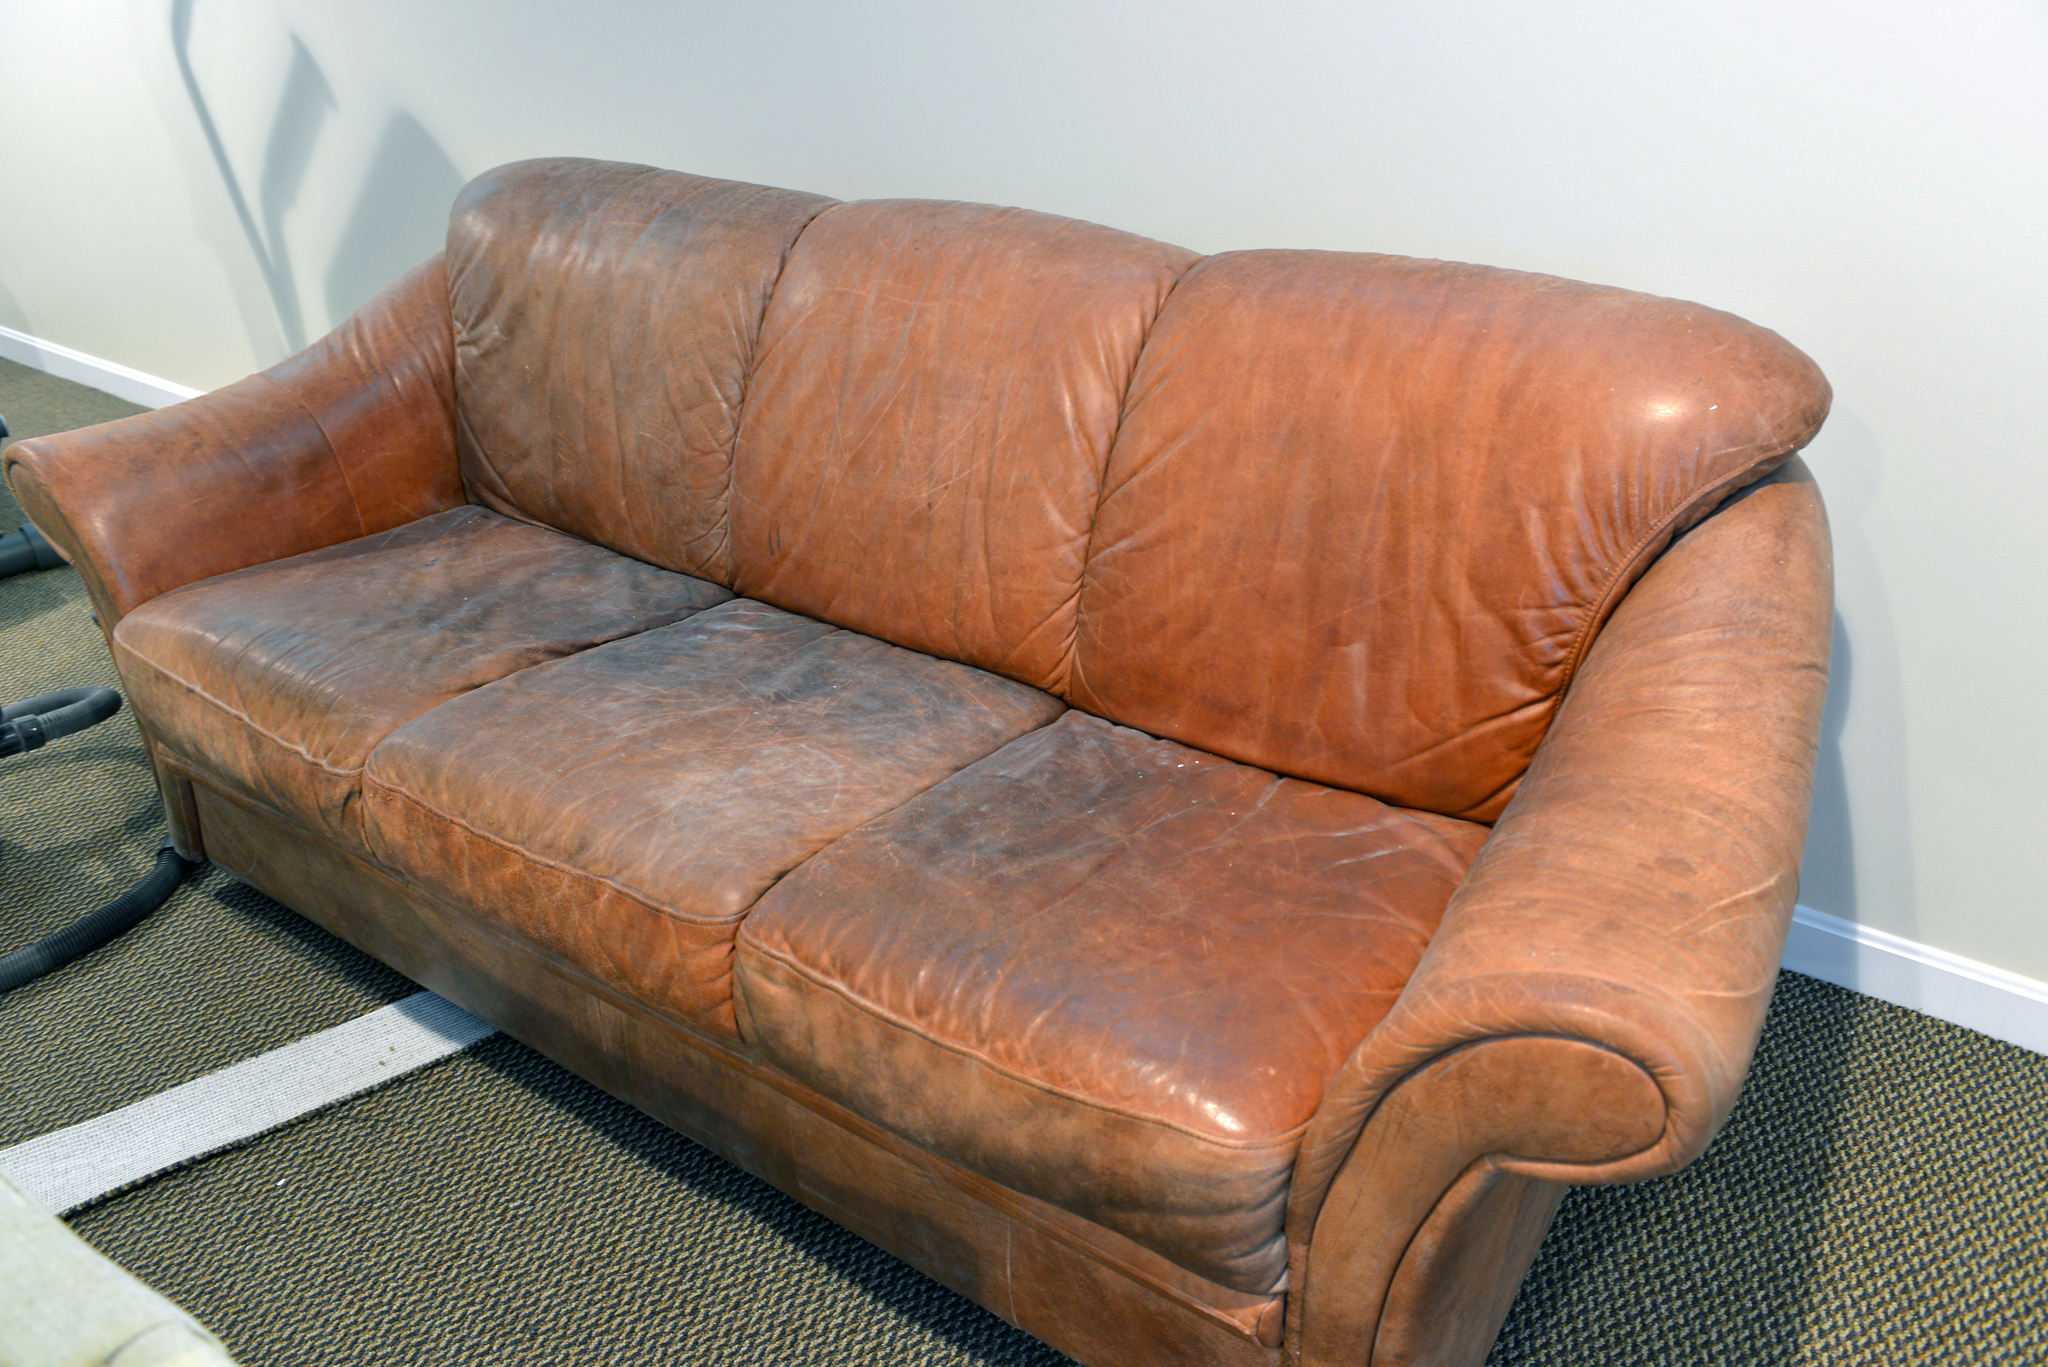 Aniline Leather Sofa By Puppy, How To Clean Aniline Leather Sofa